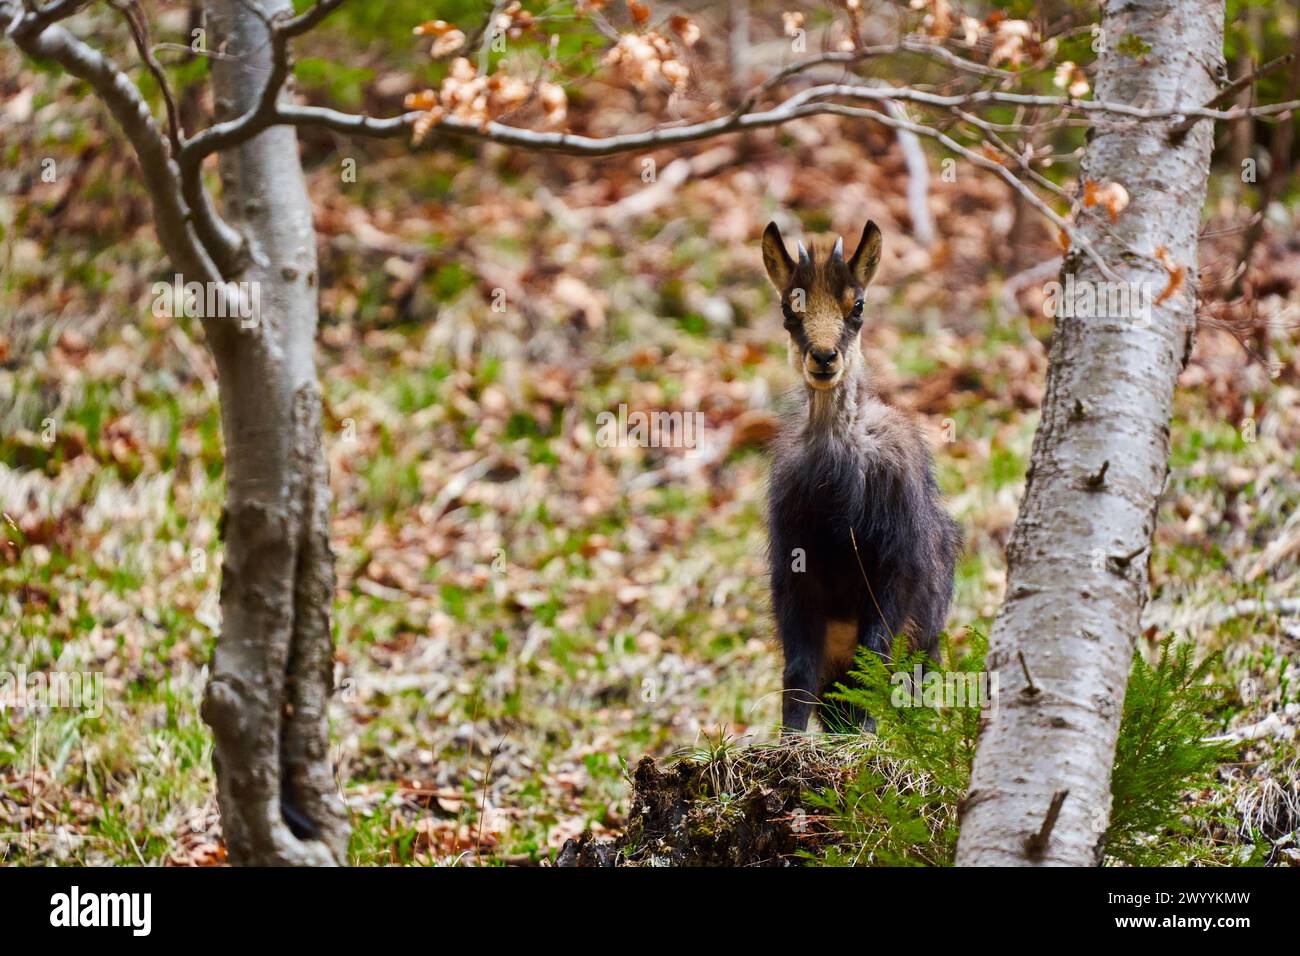 Chamois mountain goat feeding on a steep cliff with grass and trees Stock Photo